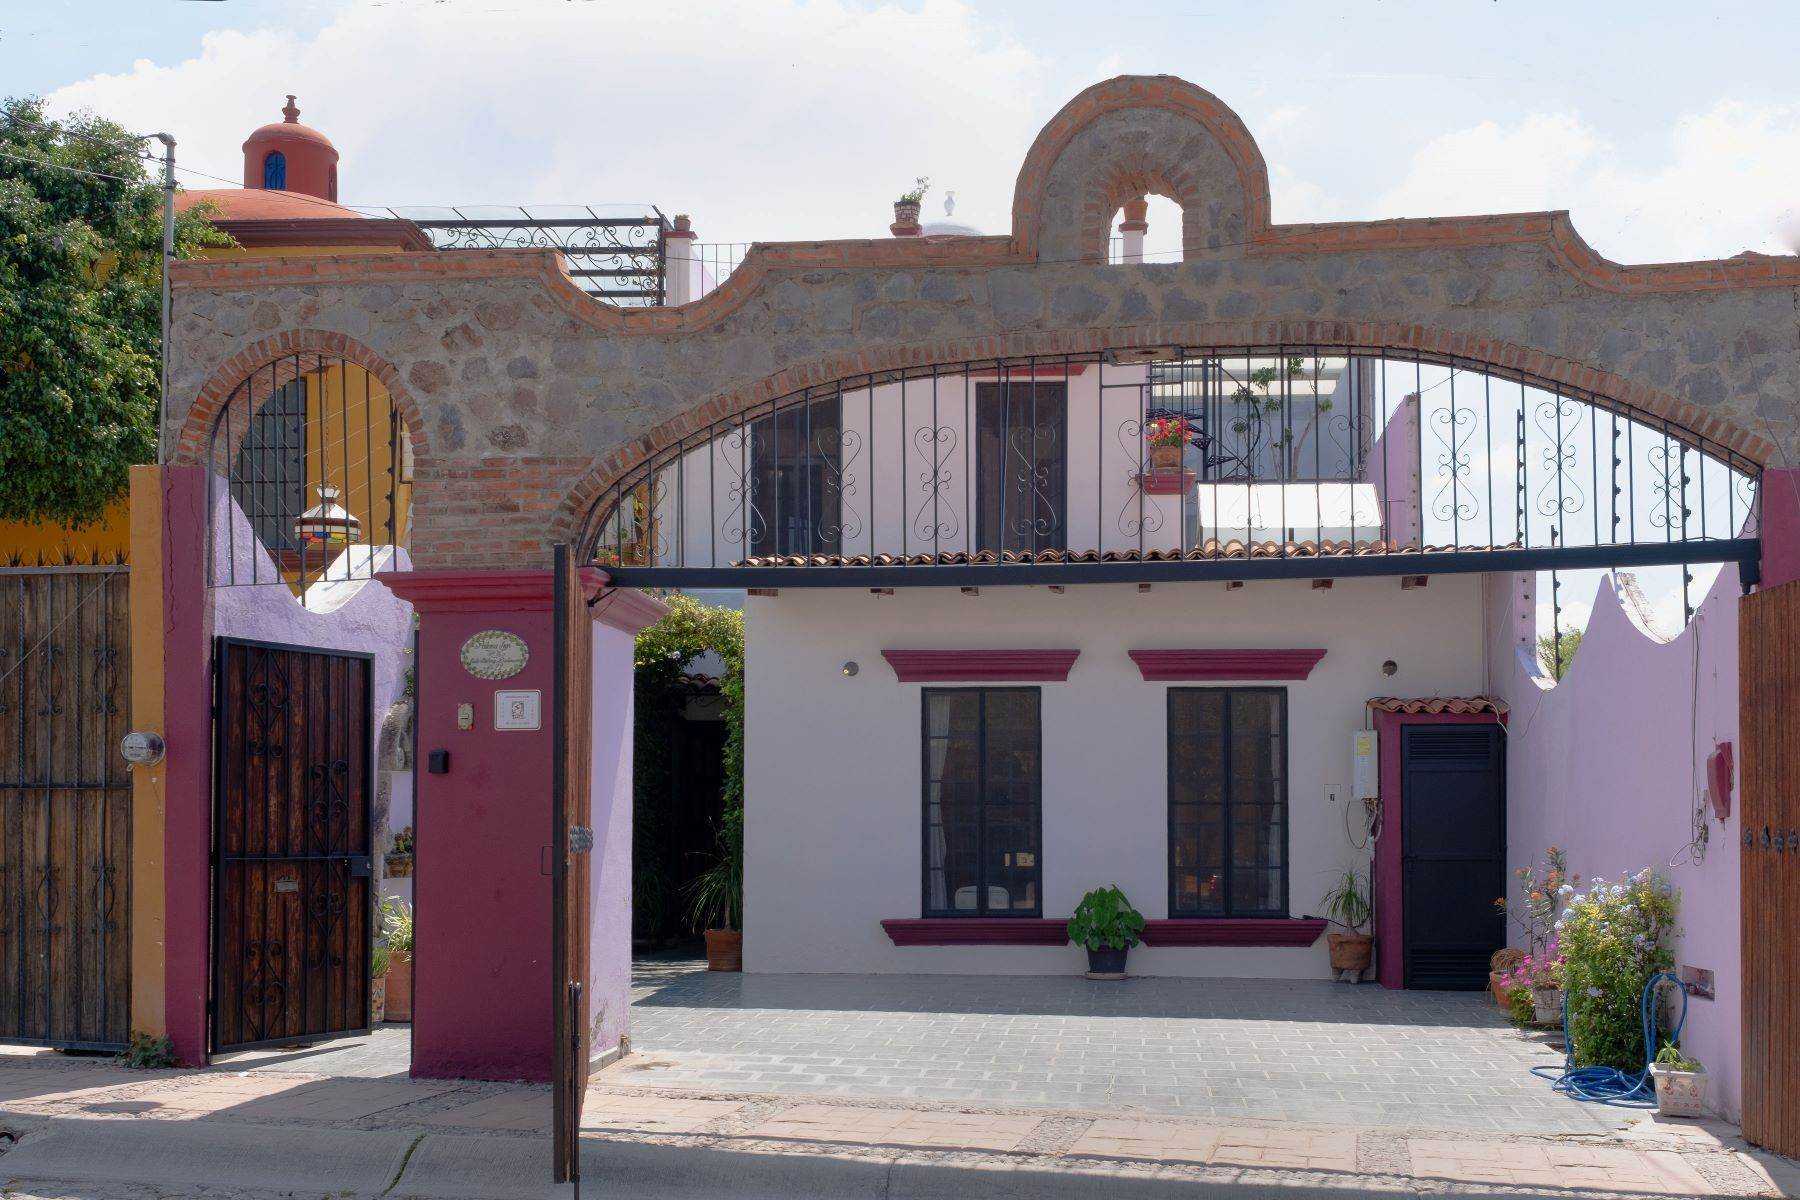 Single Family Homes for Sale at Paloma Inn Stirling Dickinson 22 San Miguel De Allende, Guanajuato 37750 Mexico